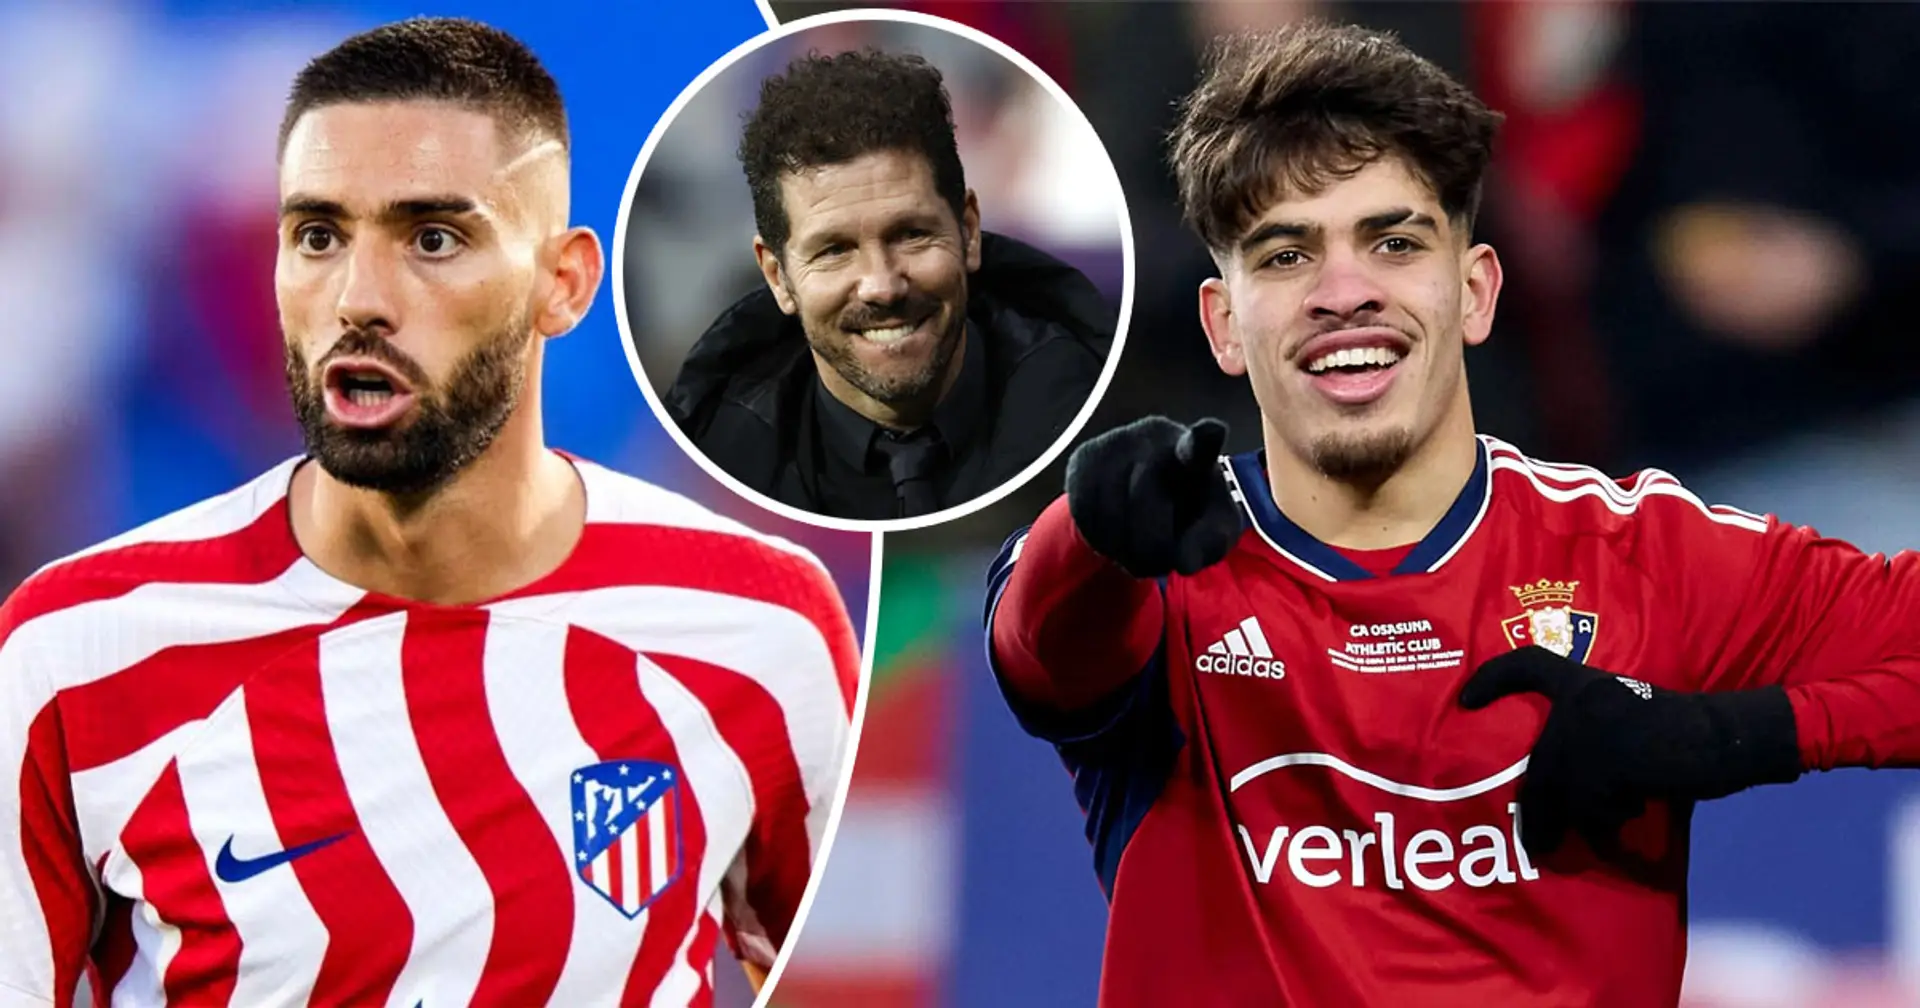 Atletico interested in Abde, ready to give Carrasco in exchange (reliability: 4 stars)